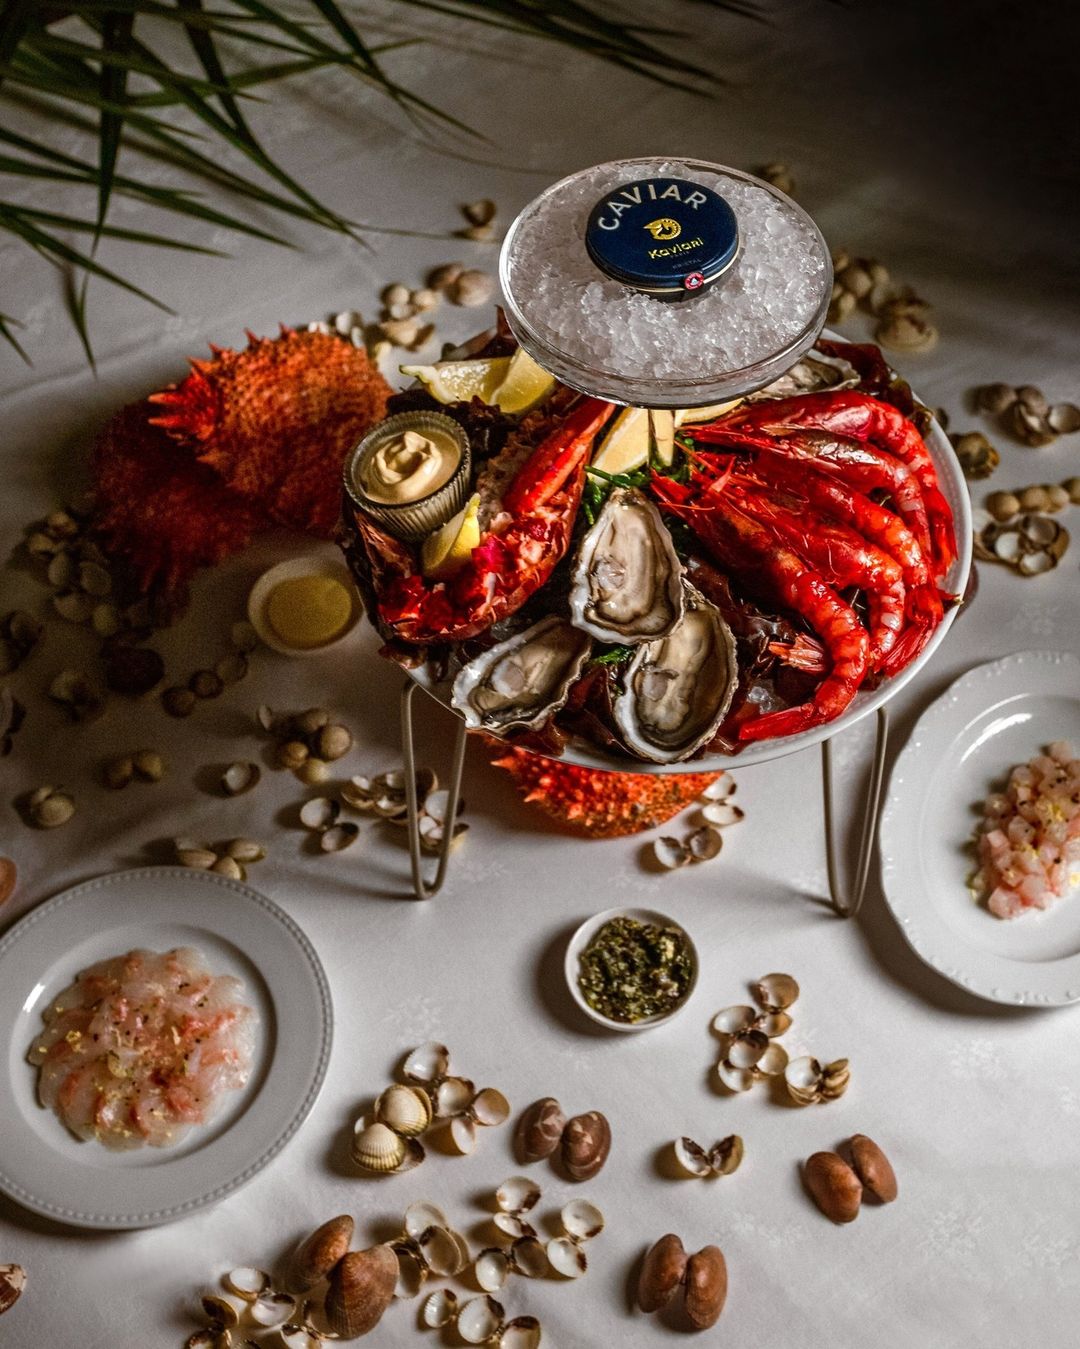 From daily catches of raw fishes to luscious seafood delights, enhanced by Kristal Caviar